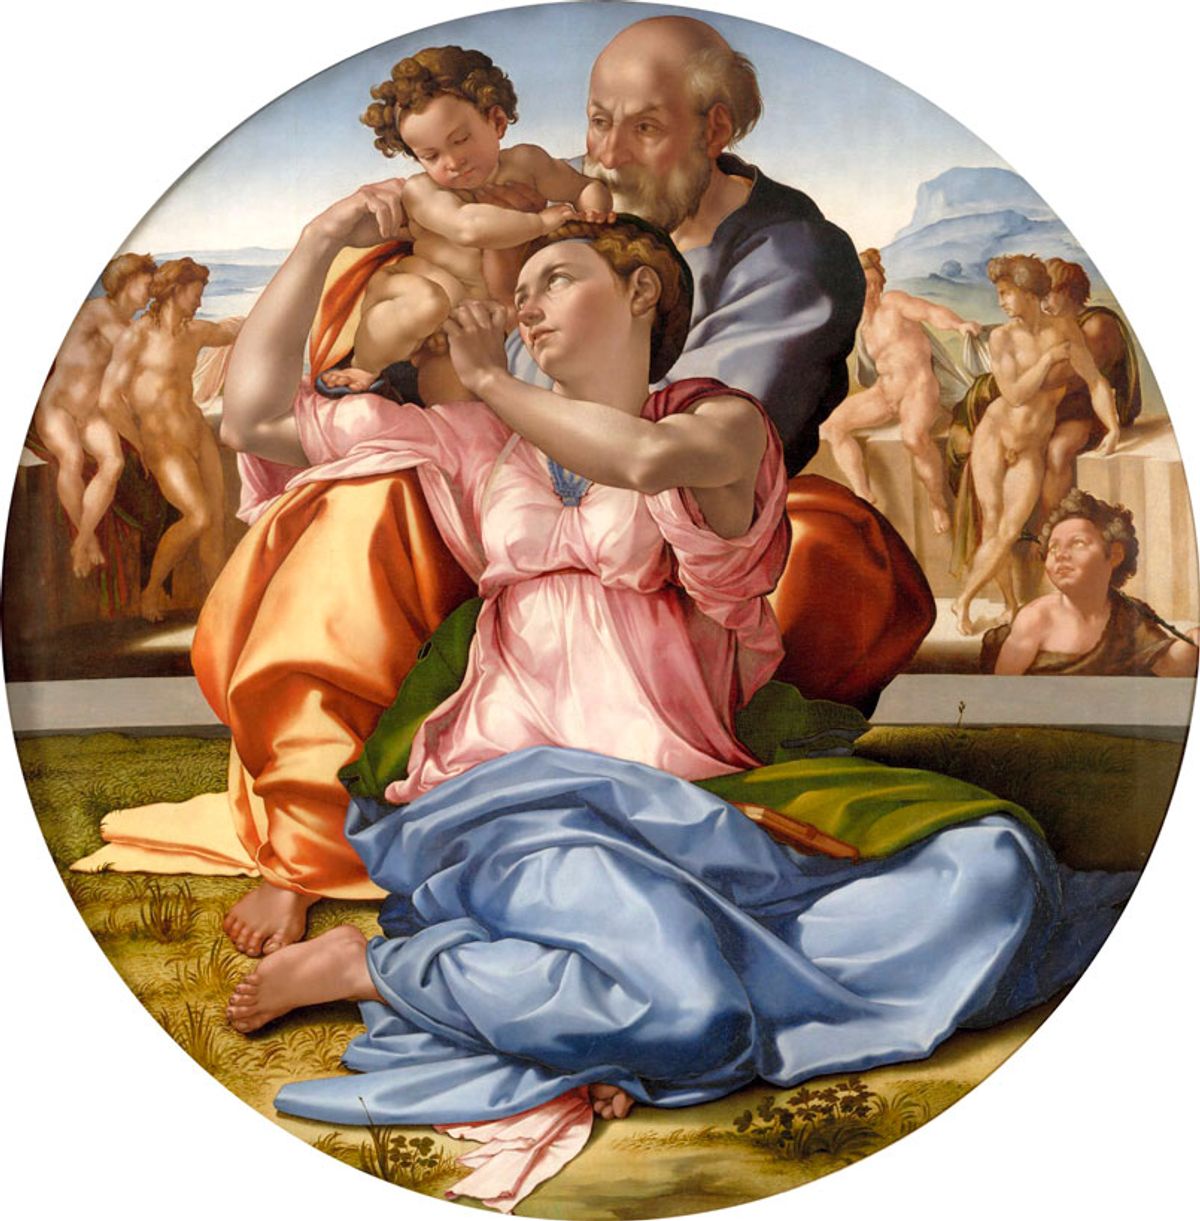 Michelangelo’s painting Doni Tondo (1505-06) was made into an NFT